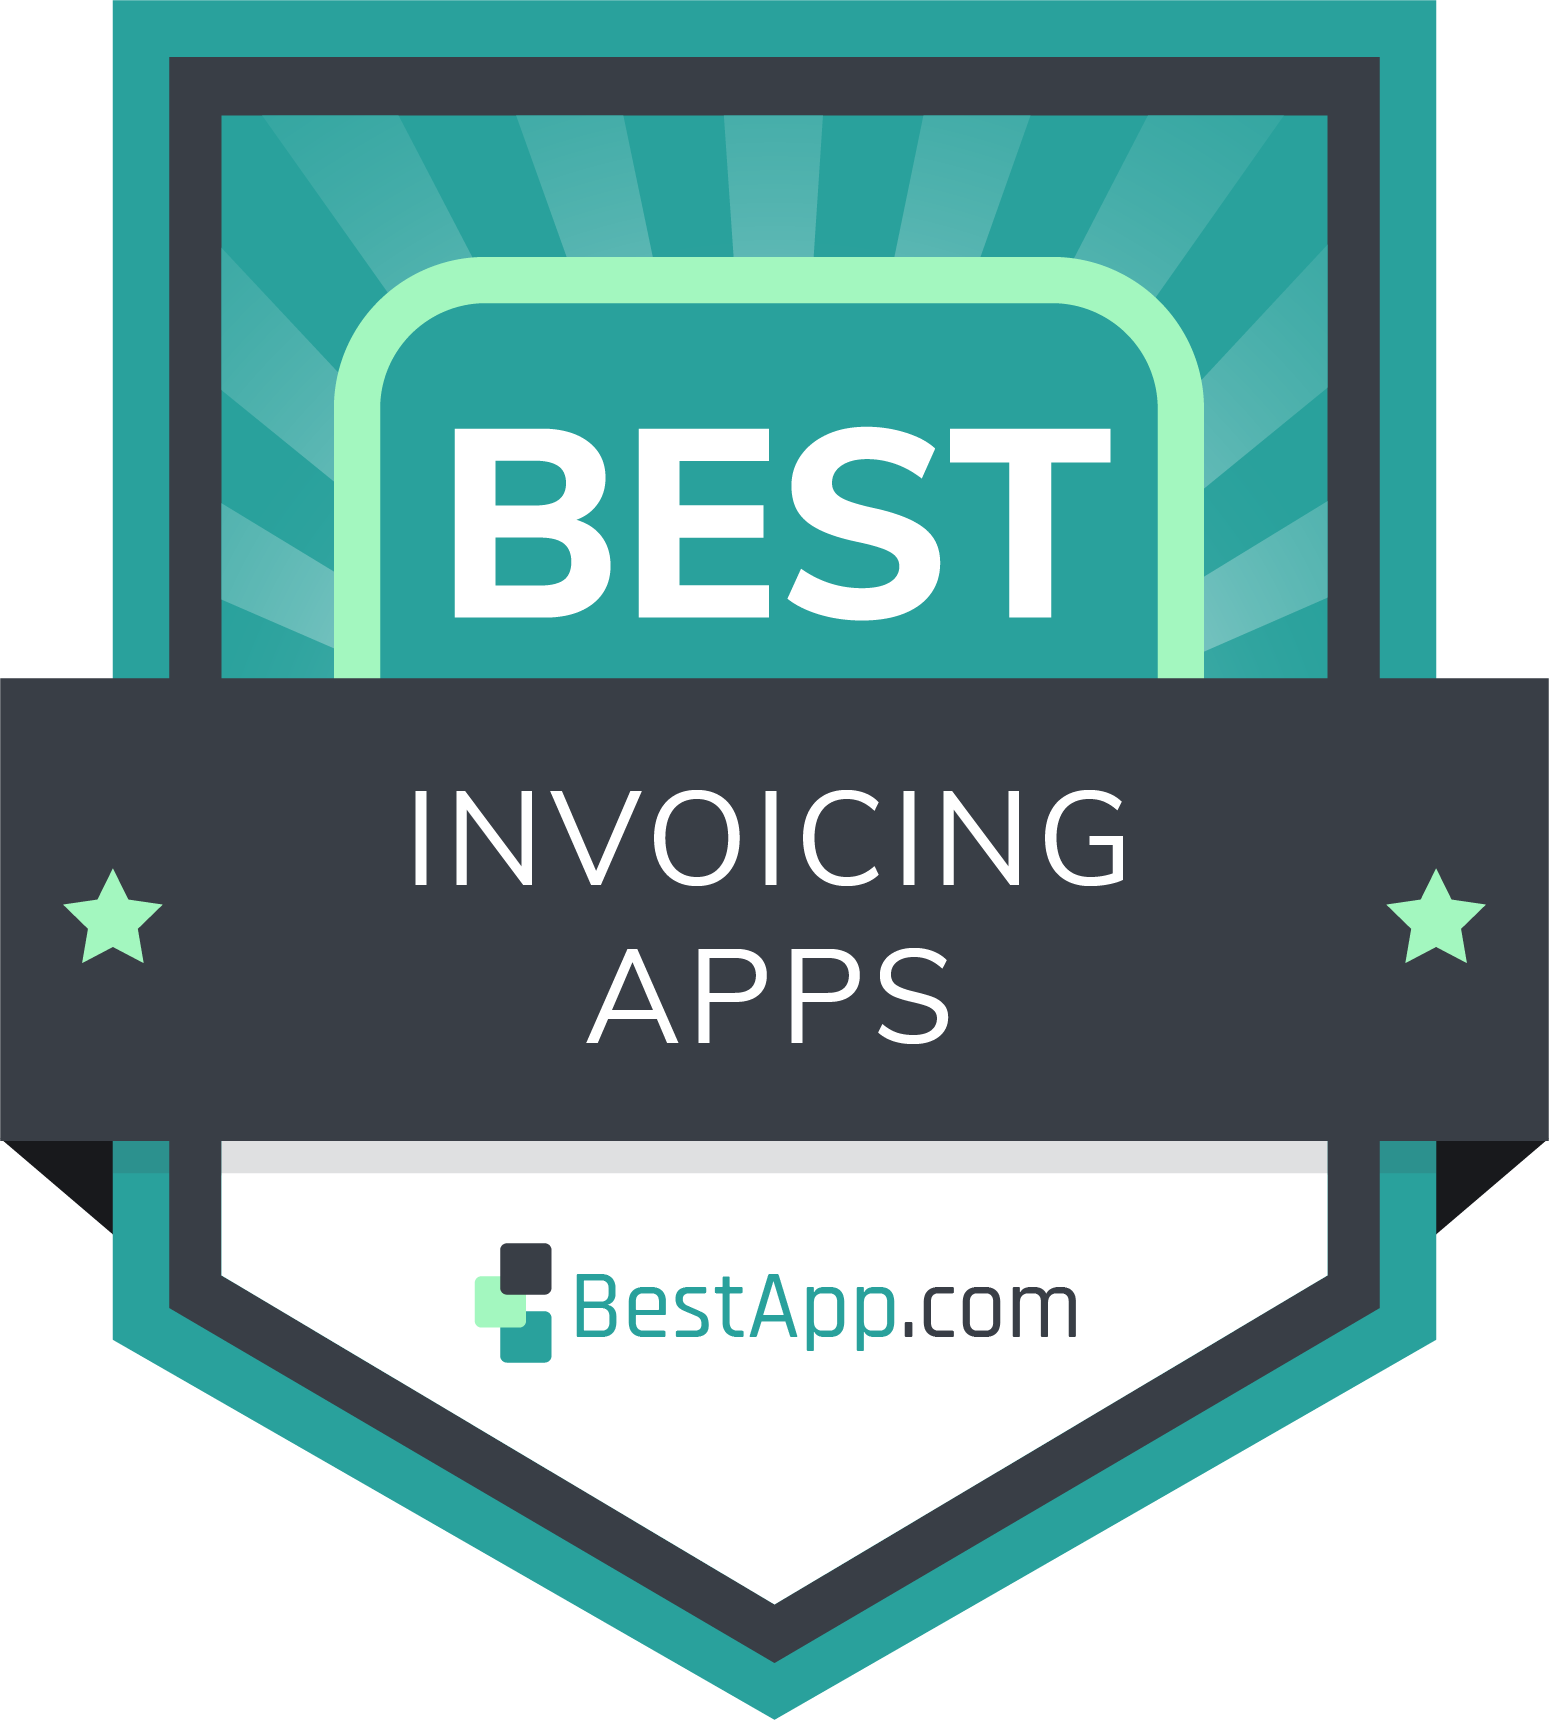 Best Invoicing Apps Badge